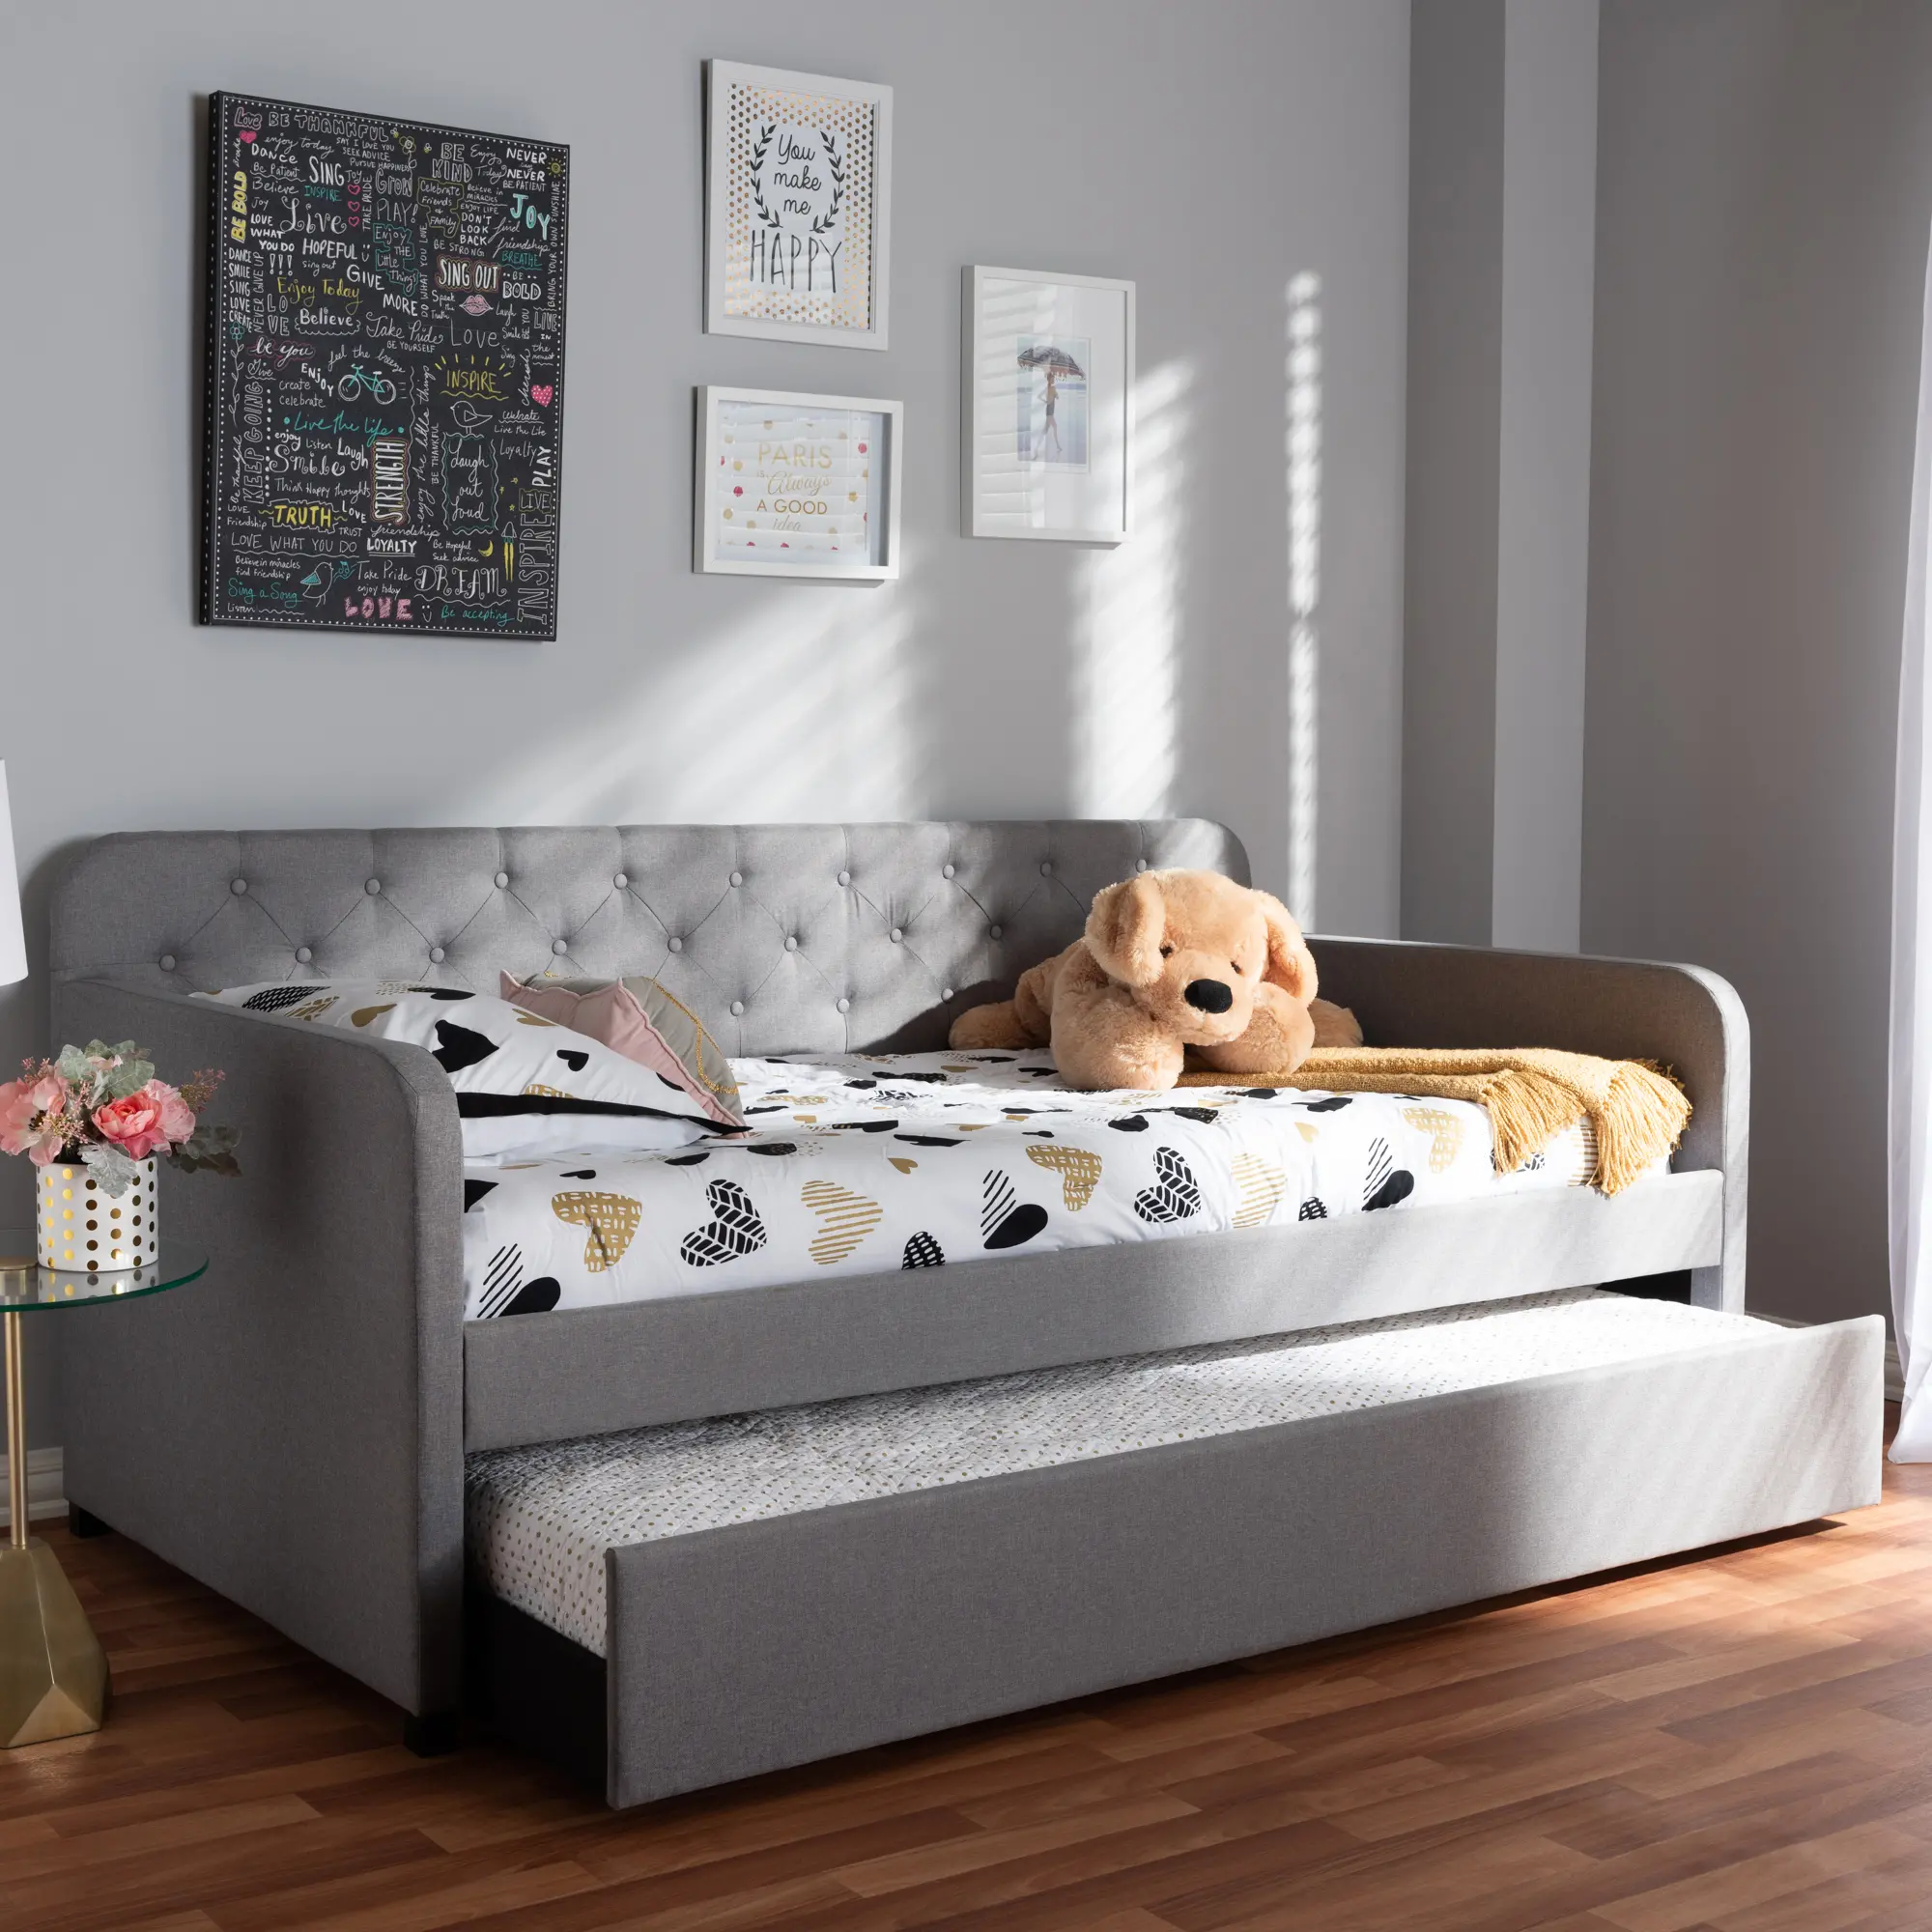 Modern Light Gray Upholstered Twin Daybed - Tahlia